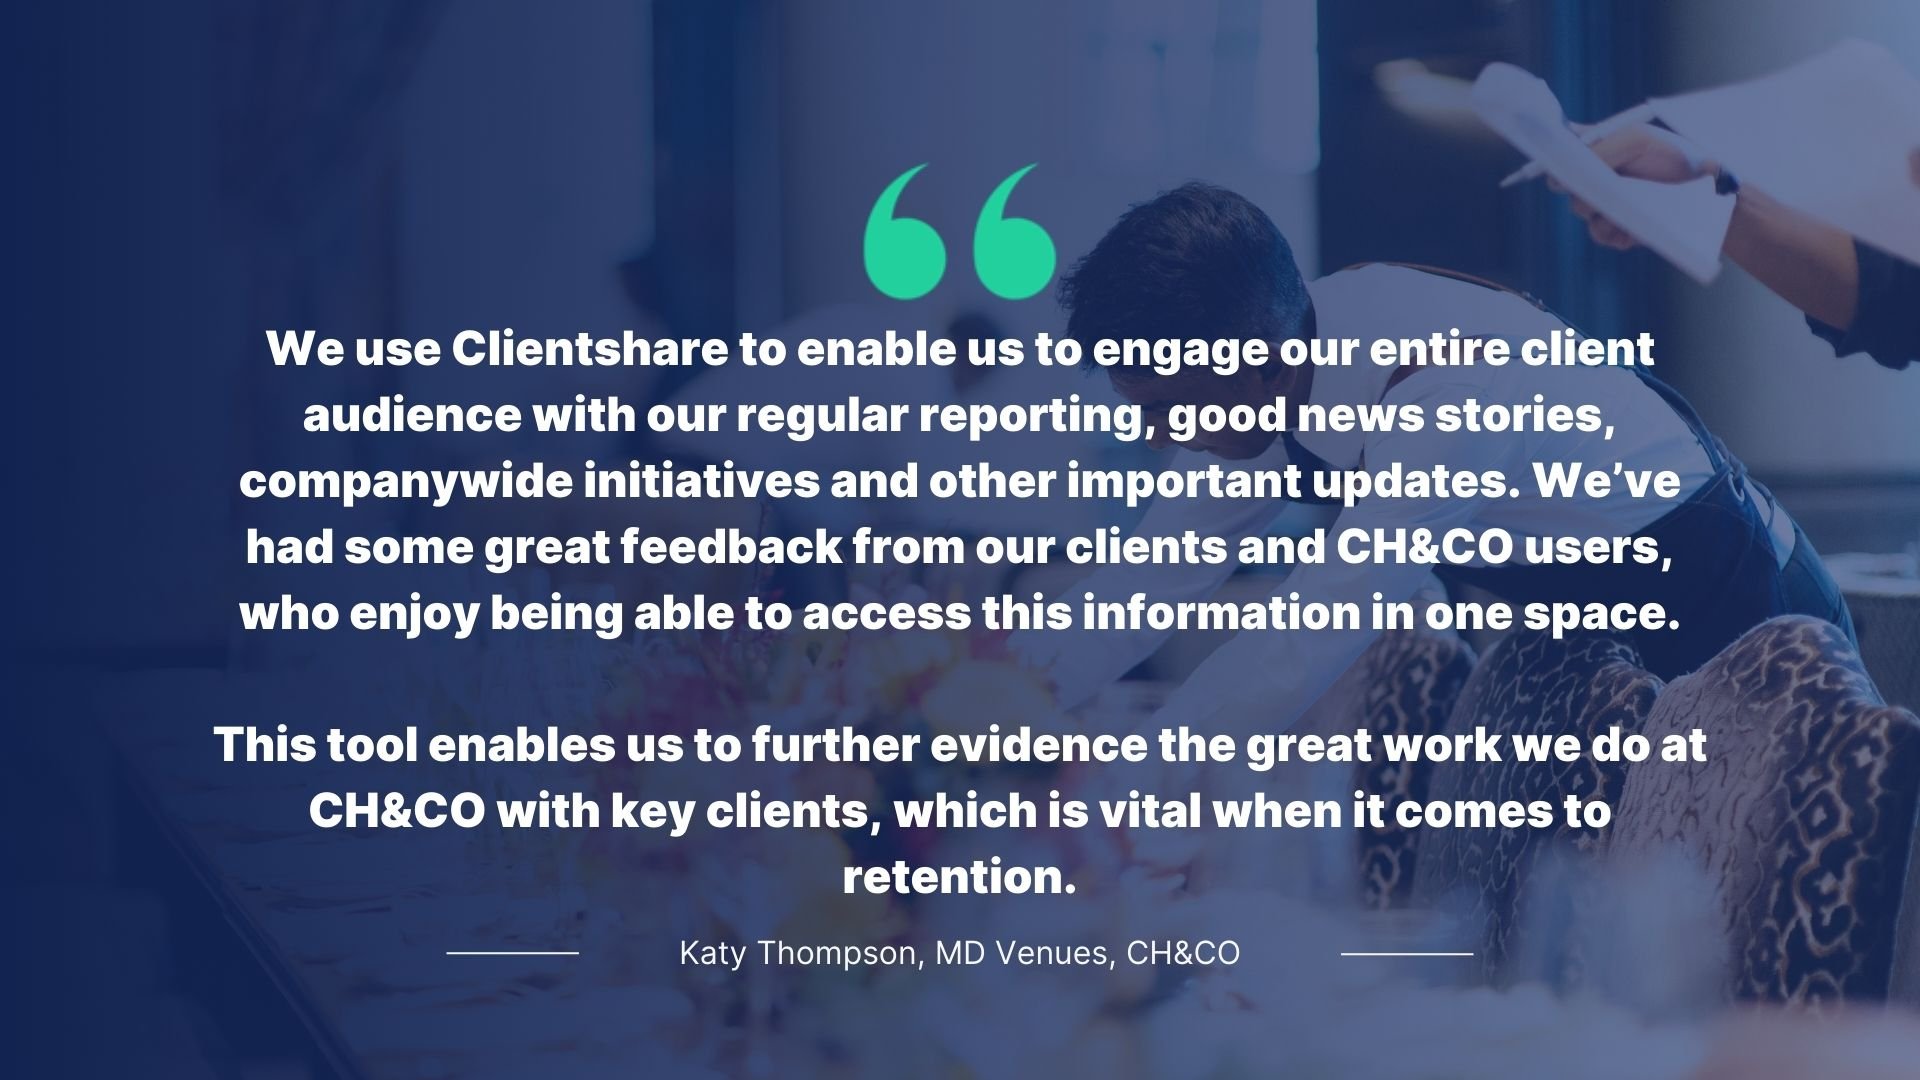 Quote by Katy Thompson, MD Venues, CH&CO: We use Clientshare to enable us to engage our entire client audience with our regular reporting, good news stories, company-wide initiatives and other important updates. We've had some great feedback from our clients and CH&CO users, who enjoy being able to access this information in one space. This tool enables us to further evidence the great work we do at CH&CO with key clients, which is vital when it comes to retention.